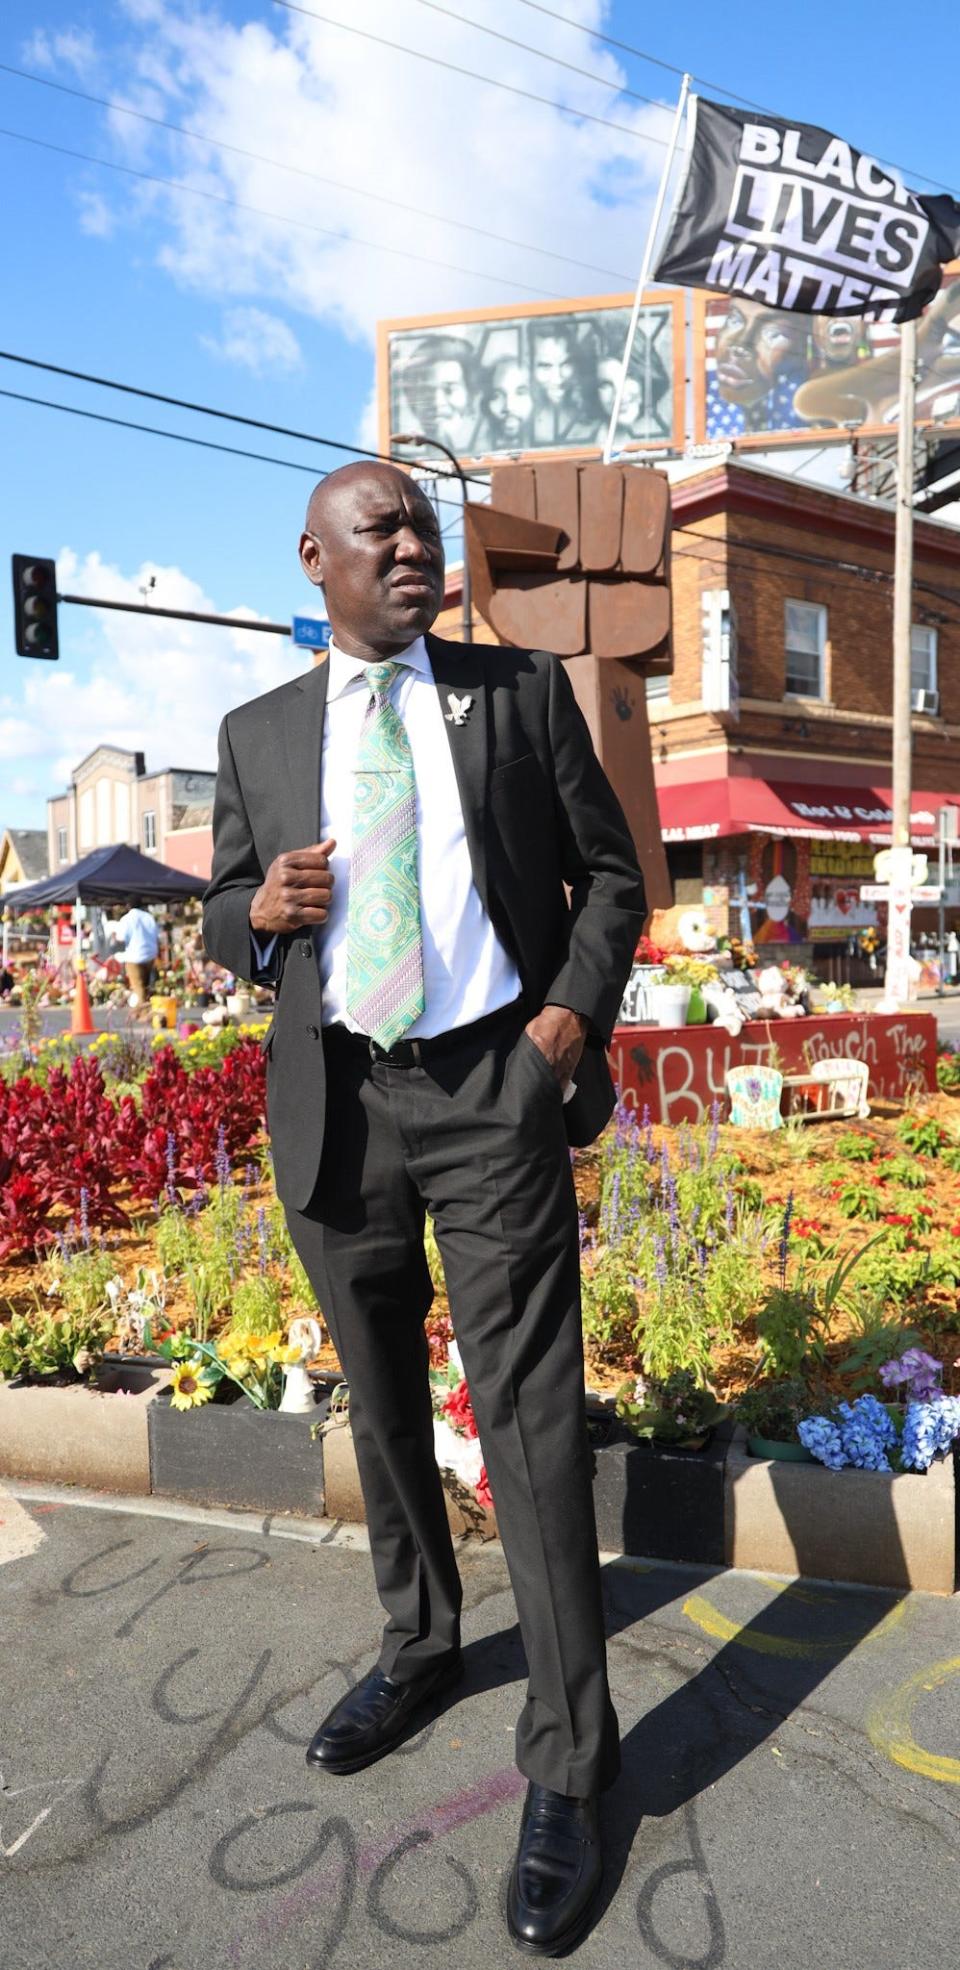 Civil Rights Attorney Ben Crump stands outside a  memorial for the late George Floyd, who died on May 25 in Minneapolis, Minnesota, while under arrest for allegedly passing counterfeit money.